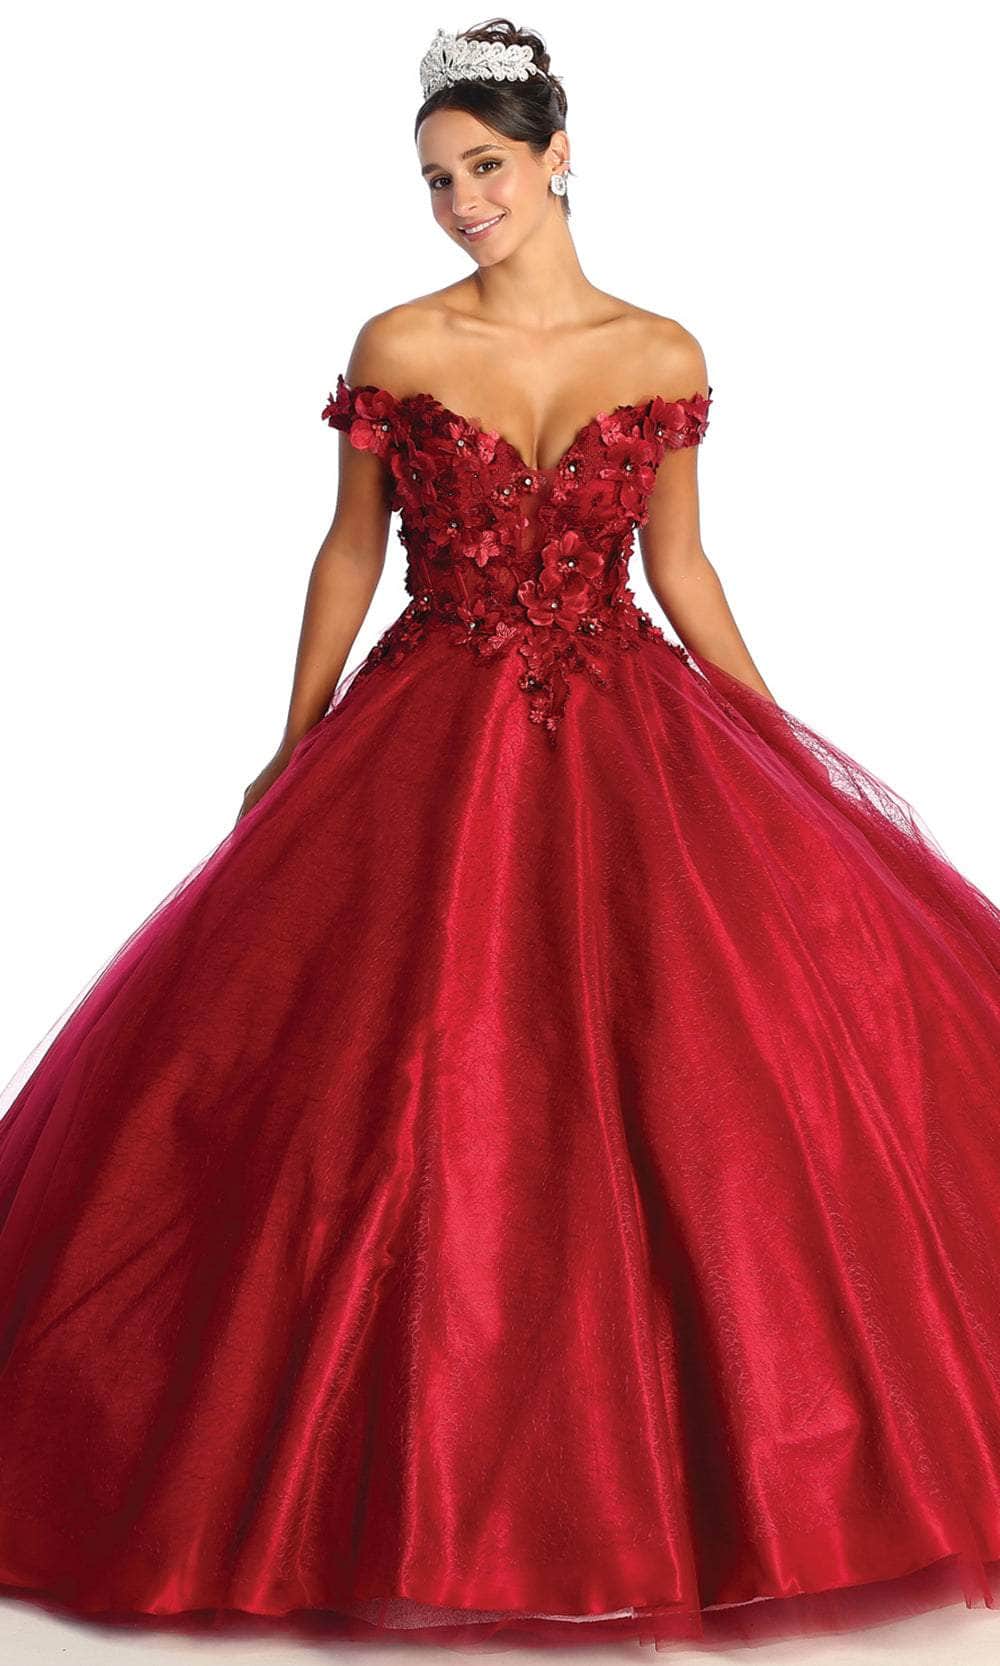 Image of May Queen LK166 - Off Shoulder Applique Prom Ballgown